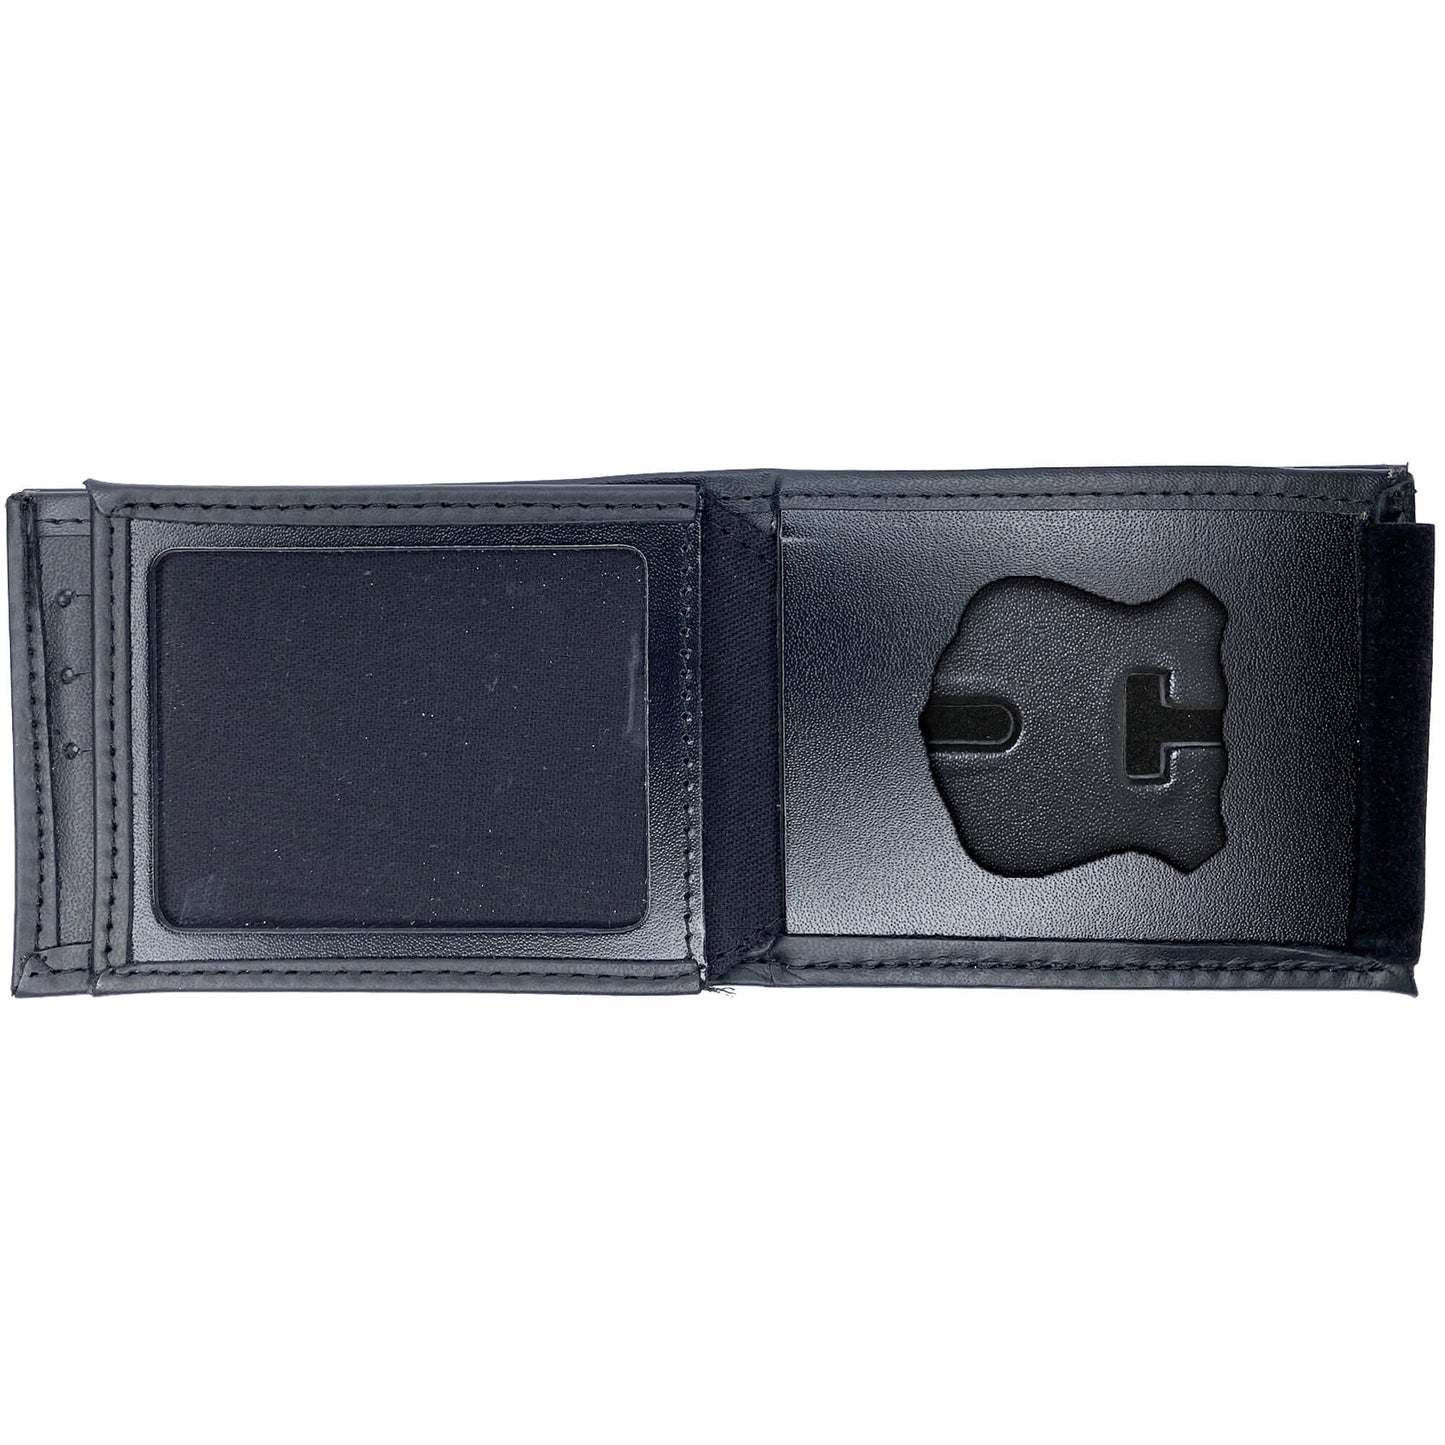 Parliamentary Protective Service PPS SPP Hidden Badge Wallet